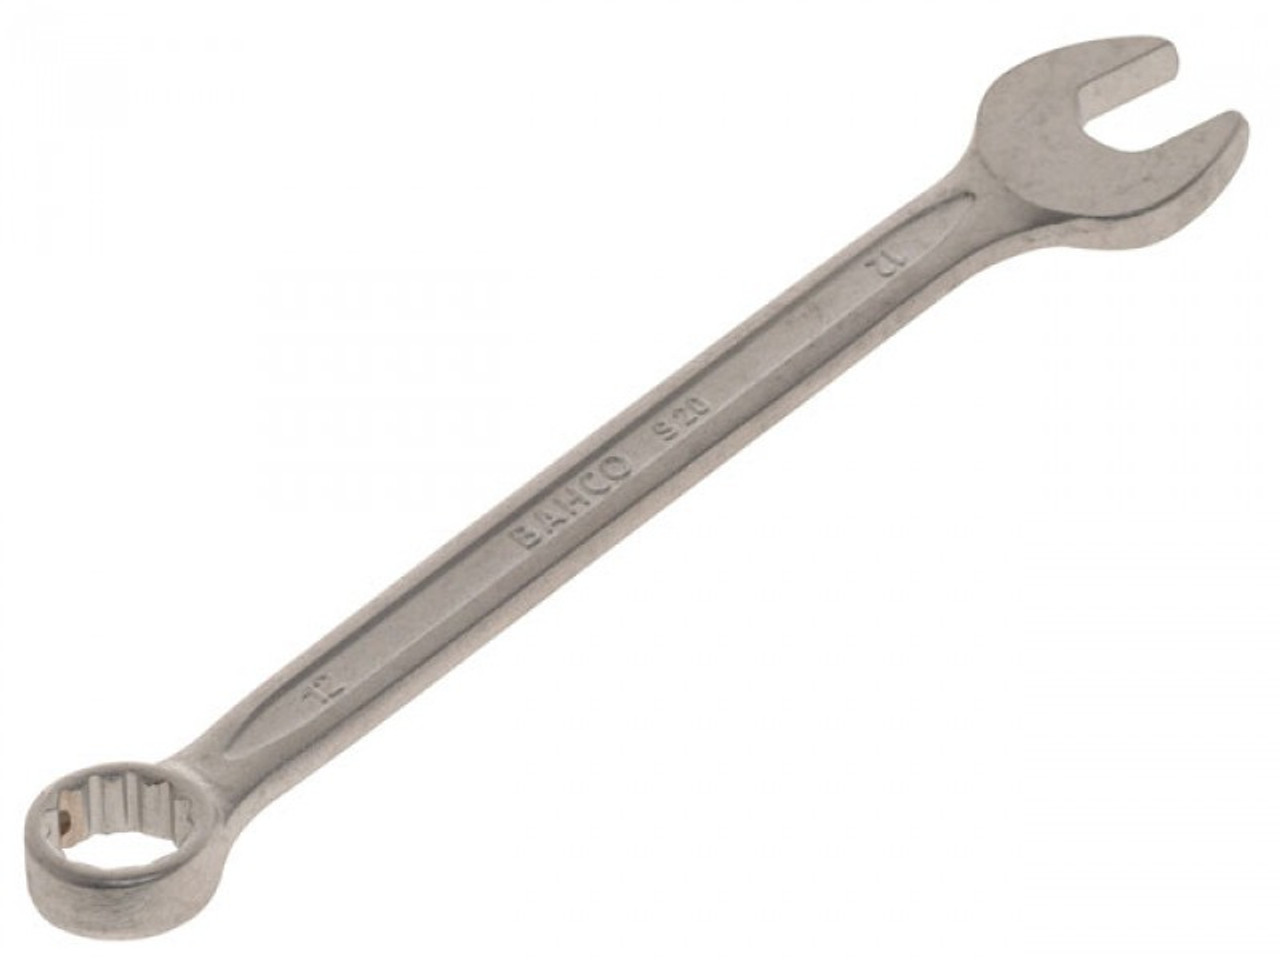 IMPA 616129 WRENCH OPEN & 12-POINT BOX METRIC 6mm   CHINA